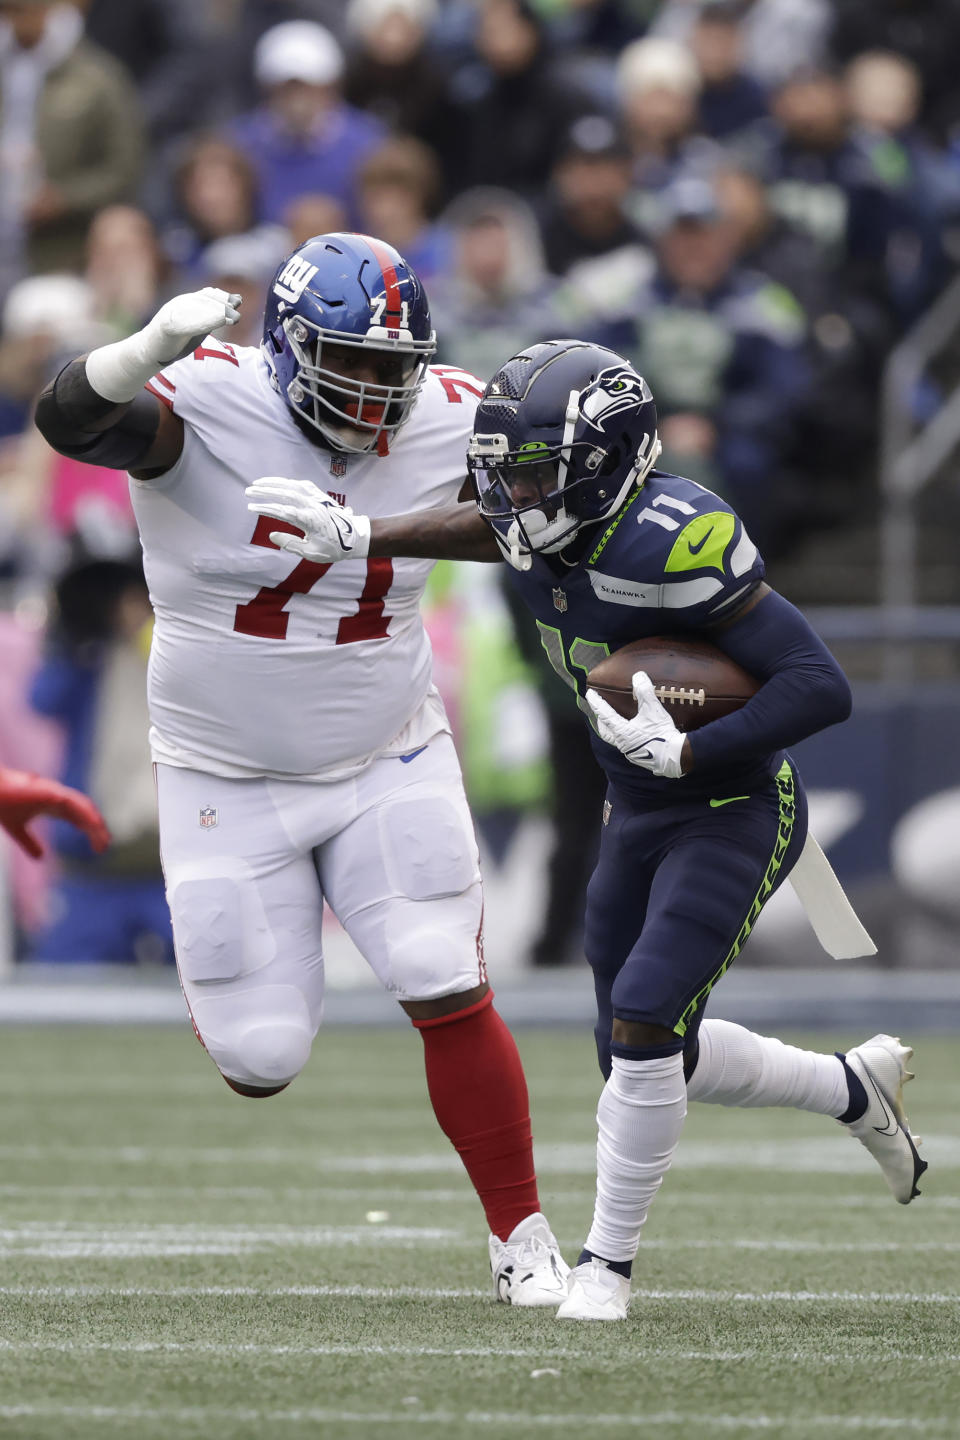 Seattle Seahawks wide receiver Marquise Goodwin (11) runs against New York Giants defensive tackle Justin Ellis (71) during the first half of an NFL football game in Seattle, Sunday, Oct. 30, 2022. (AP Photo/John Froschauer)